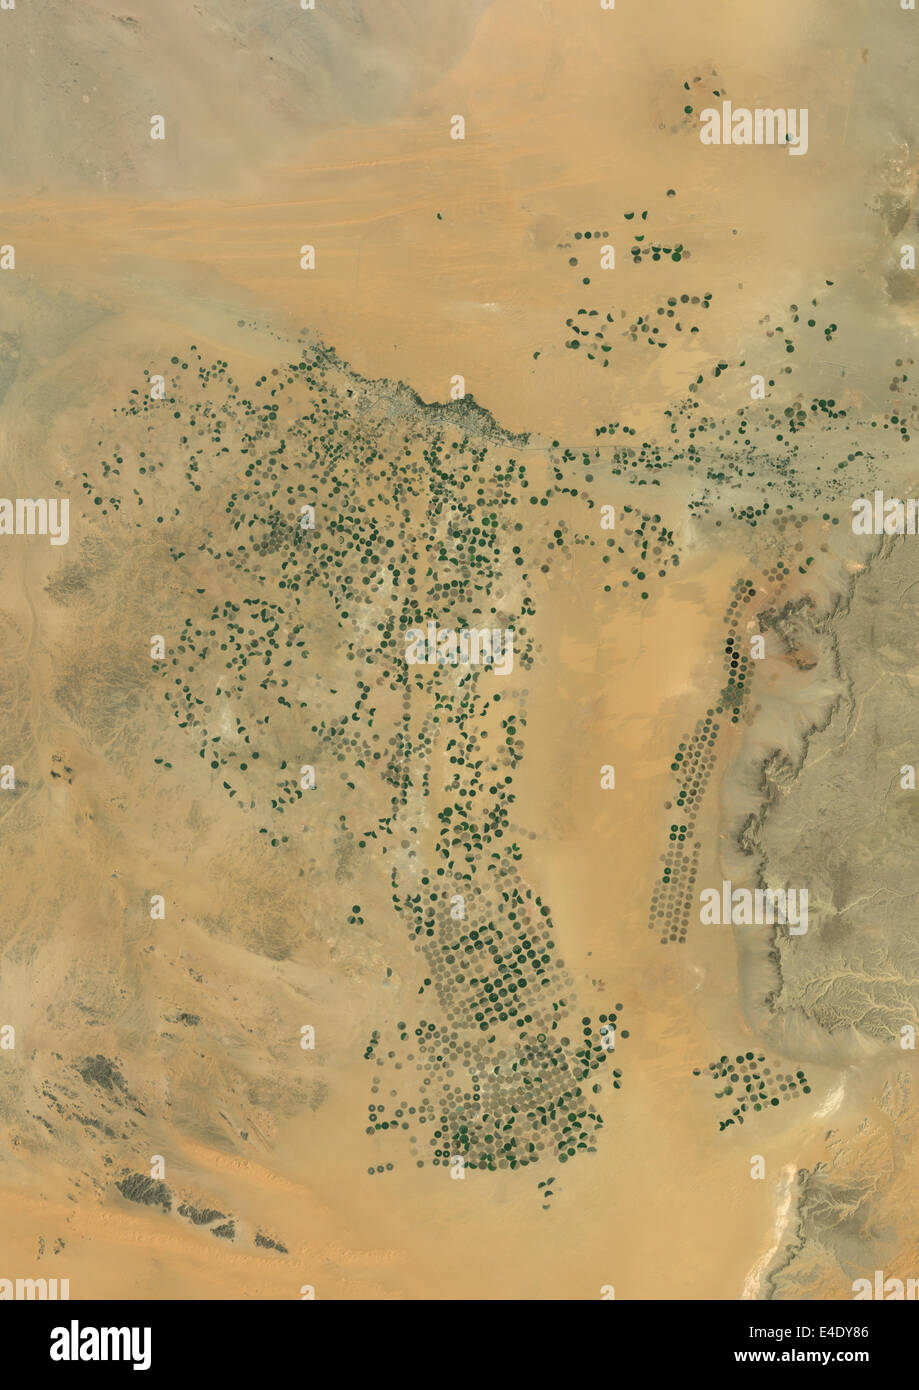 Agriculture In The Desert, South Part Of The Riyadh Province, Saudi Arabia, True Colour Satellite Image. True colour satellite i Stock Photo